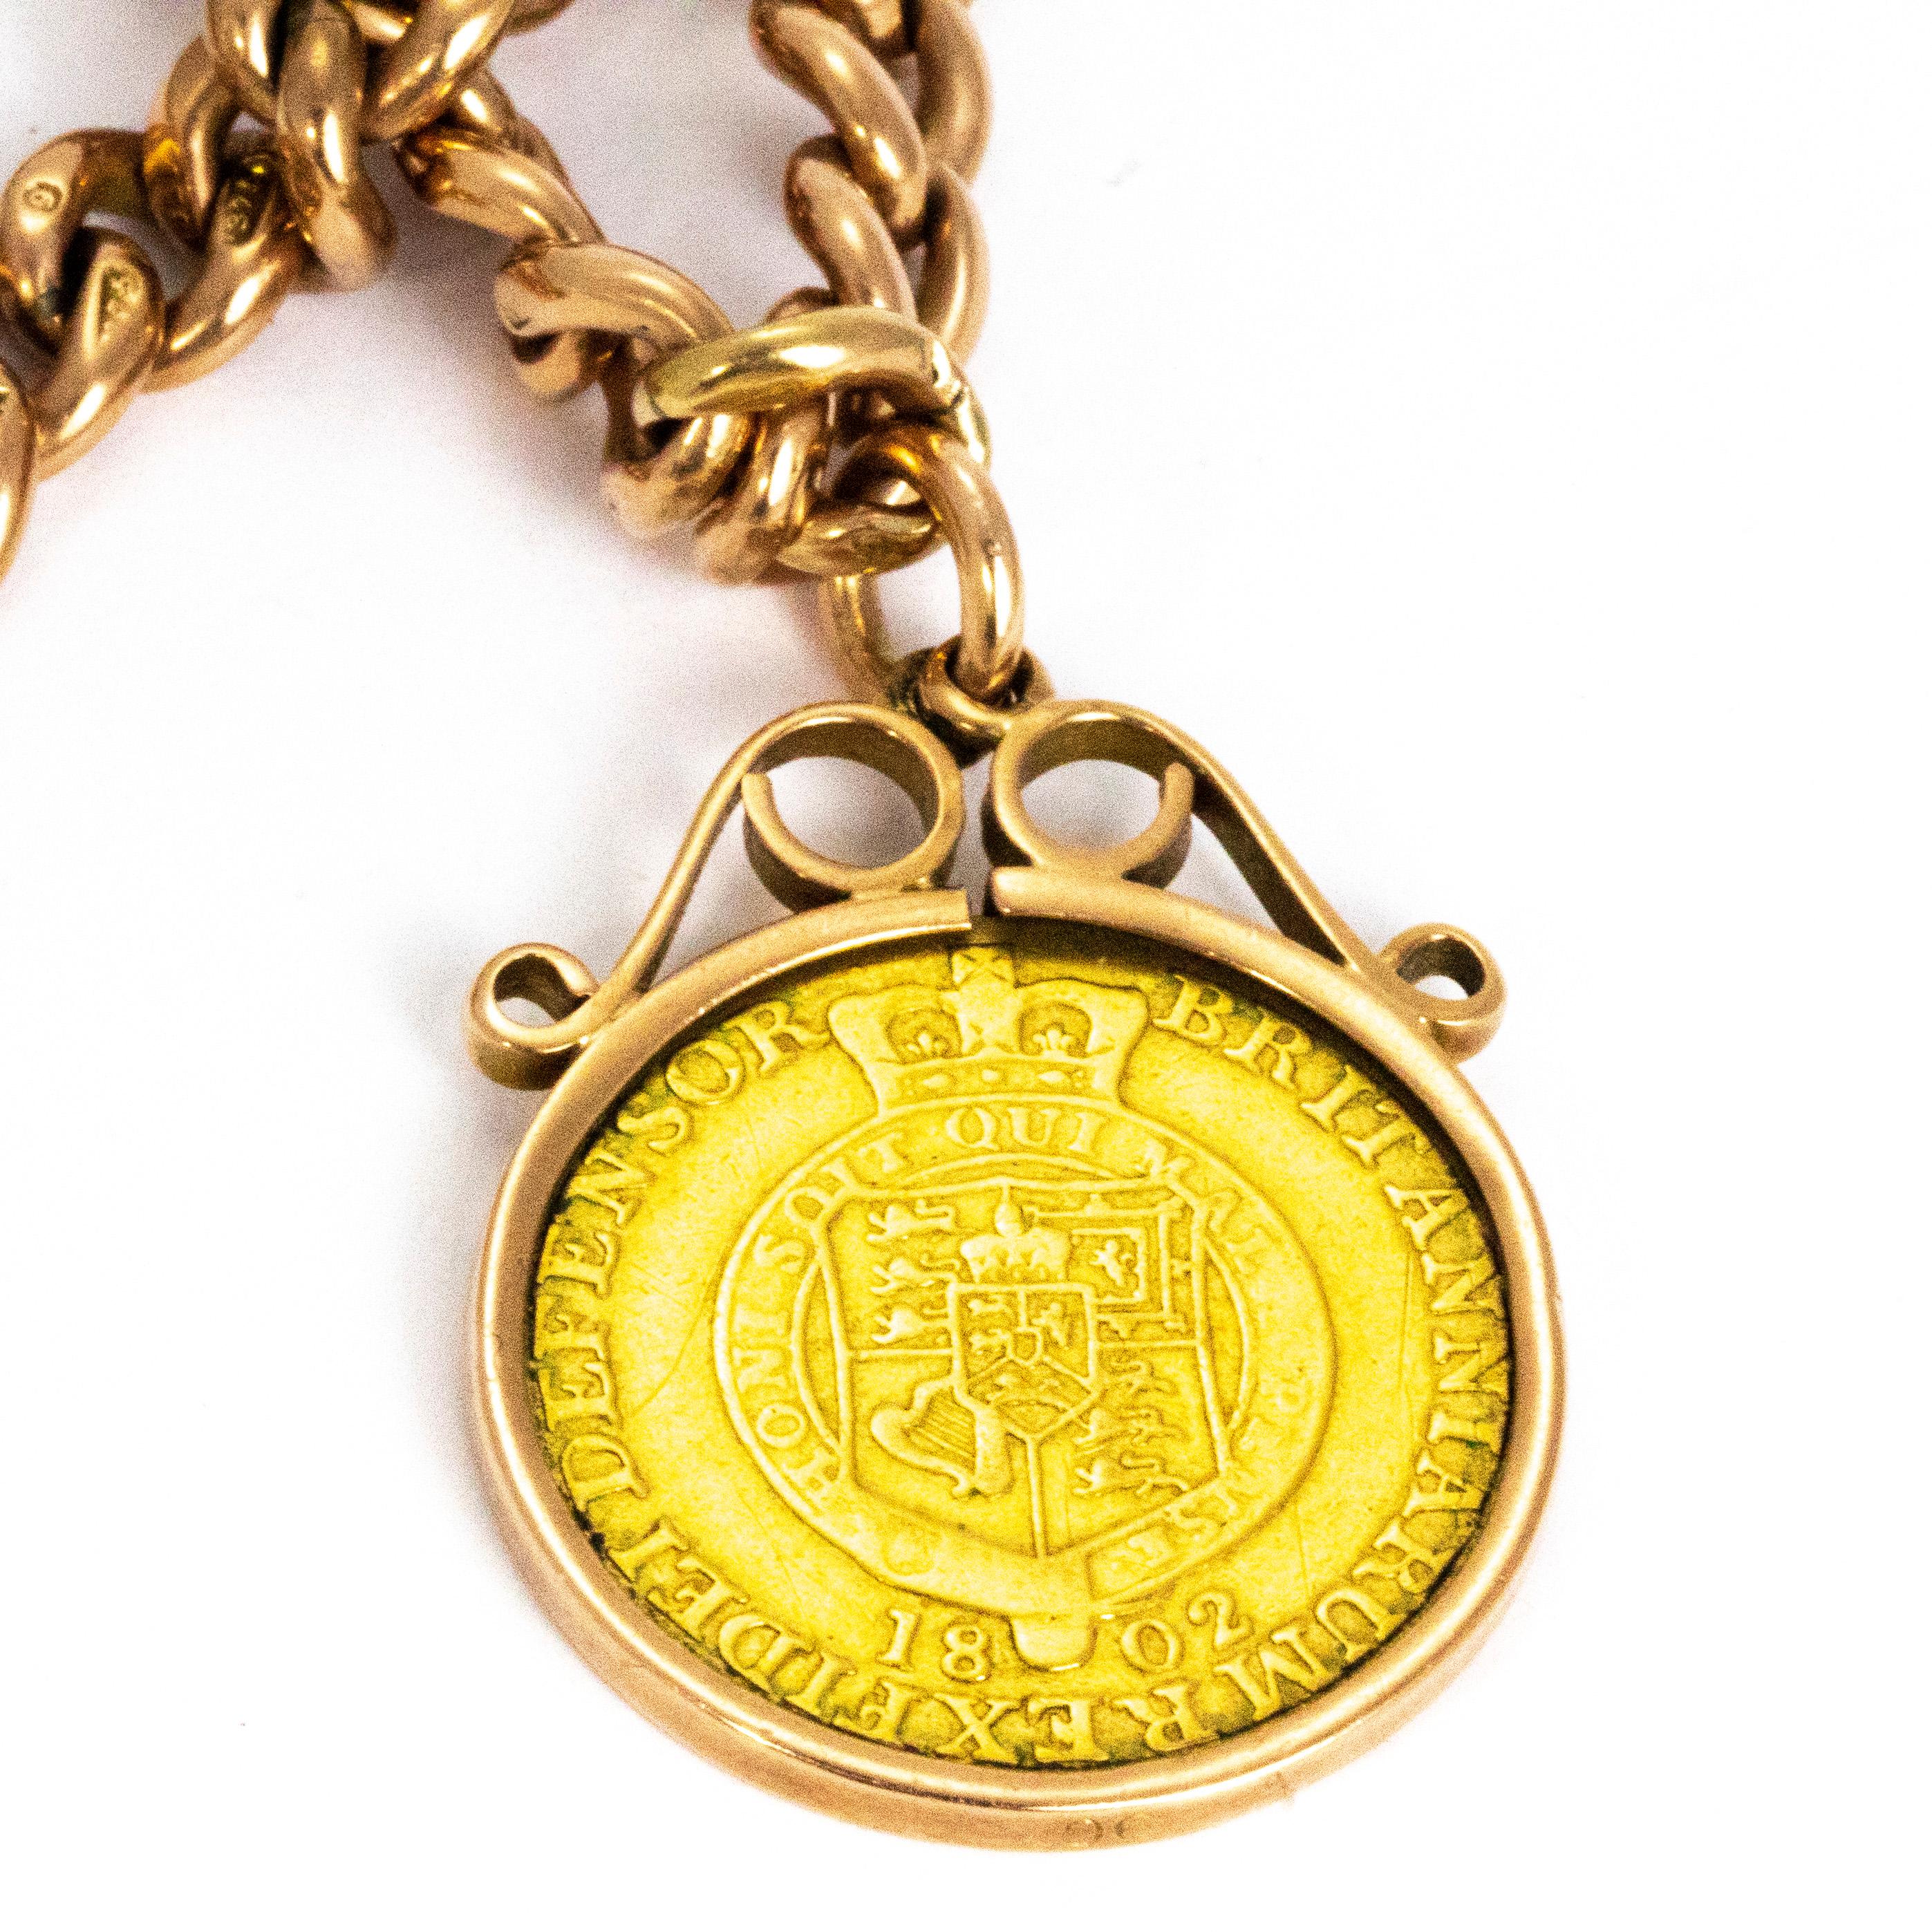 This gorgeous 9ct gold chain holds a sweet 1/2 guinea coin encased in a decorative swirl detailed surround. The chain is chunky and has a lovely weight to it. The albert necklace fastens using two swivel dog clips. 

Chain Length: 16inches 
Pendant